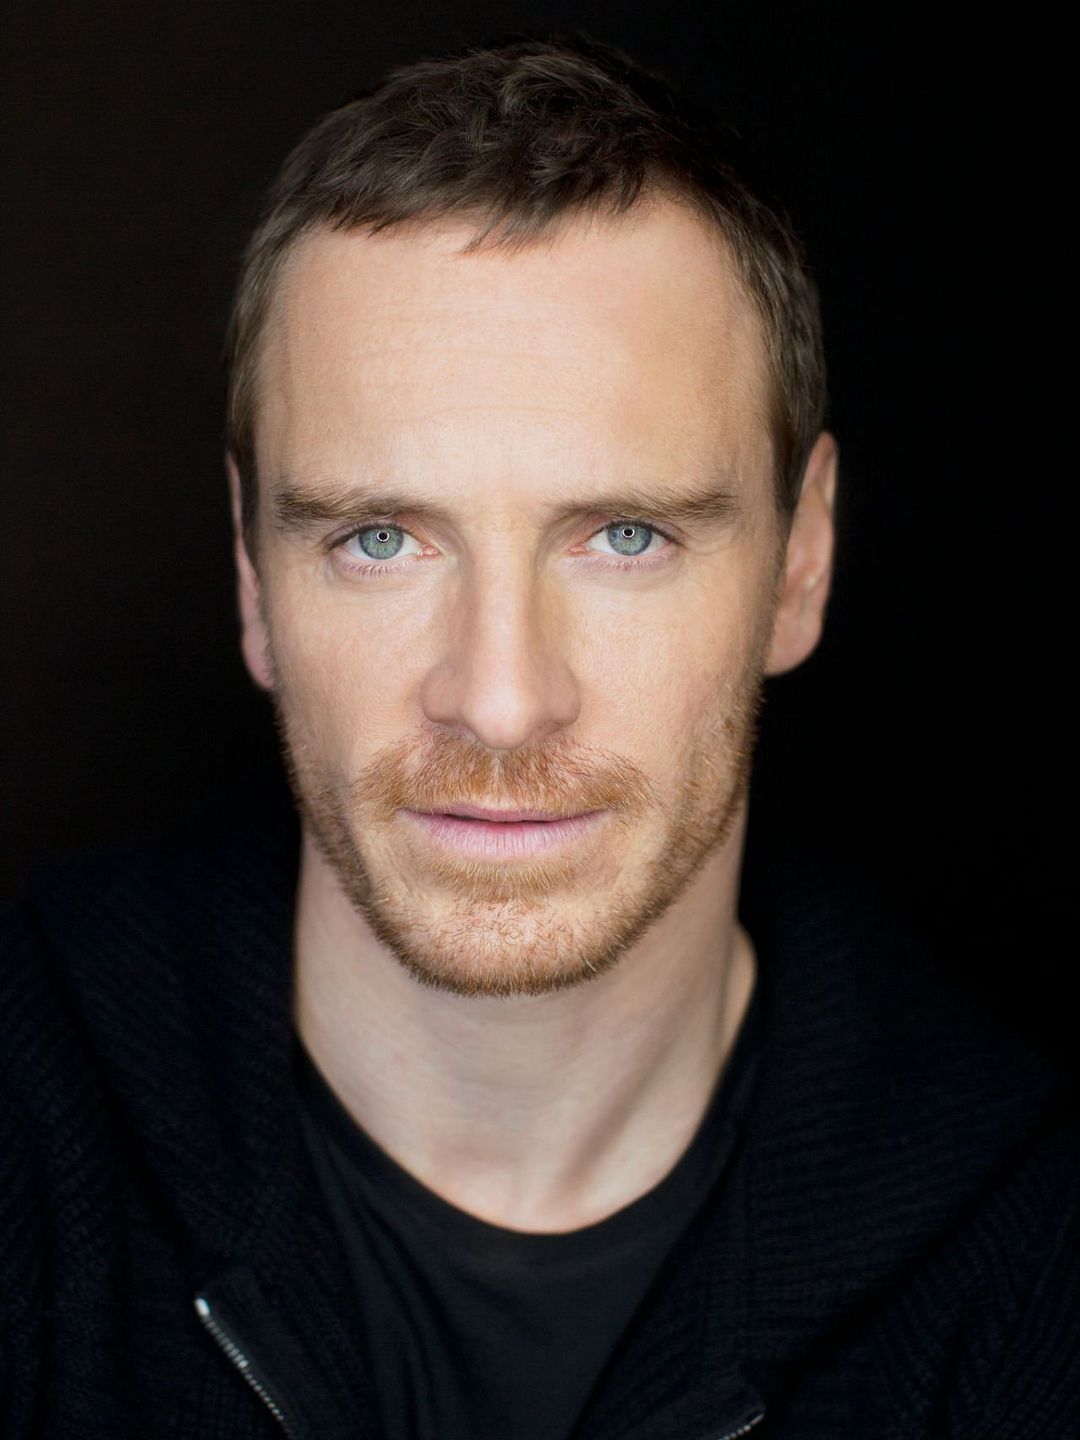 Michael Fassbender story of success